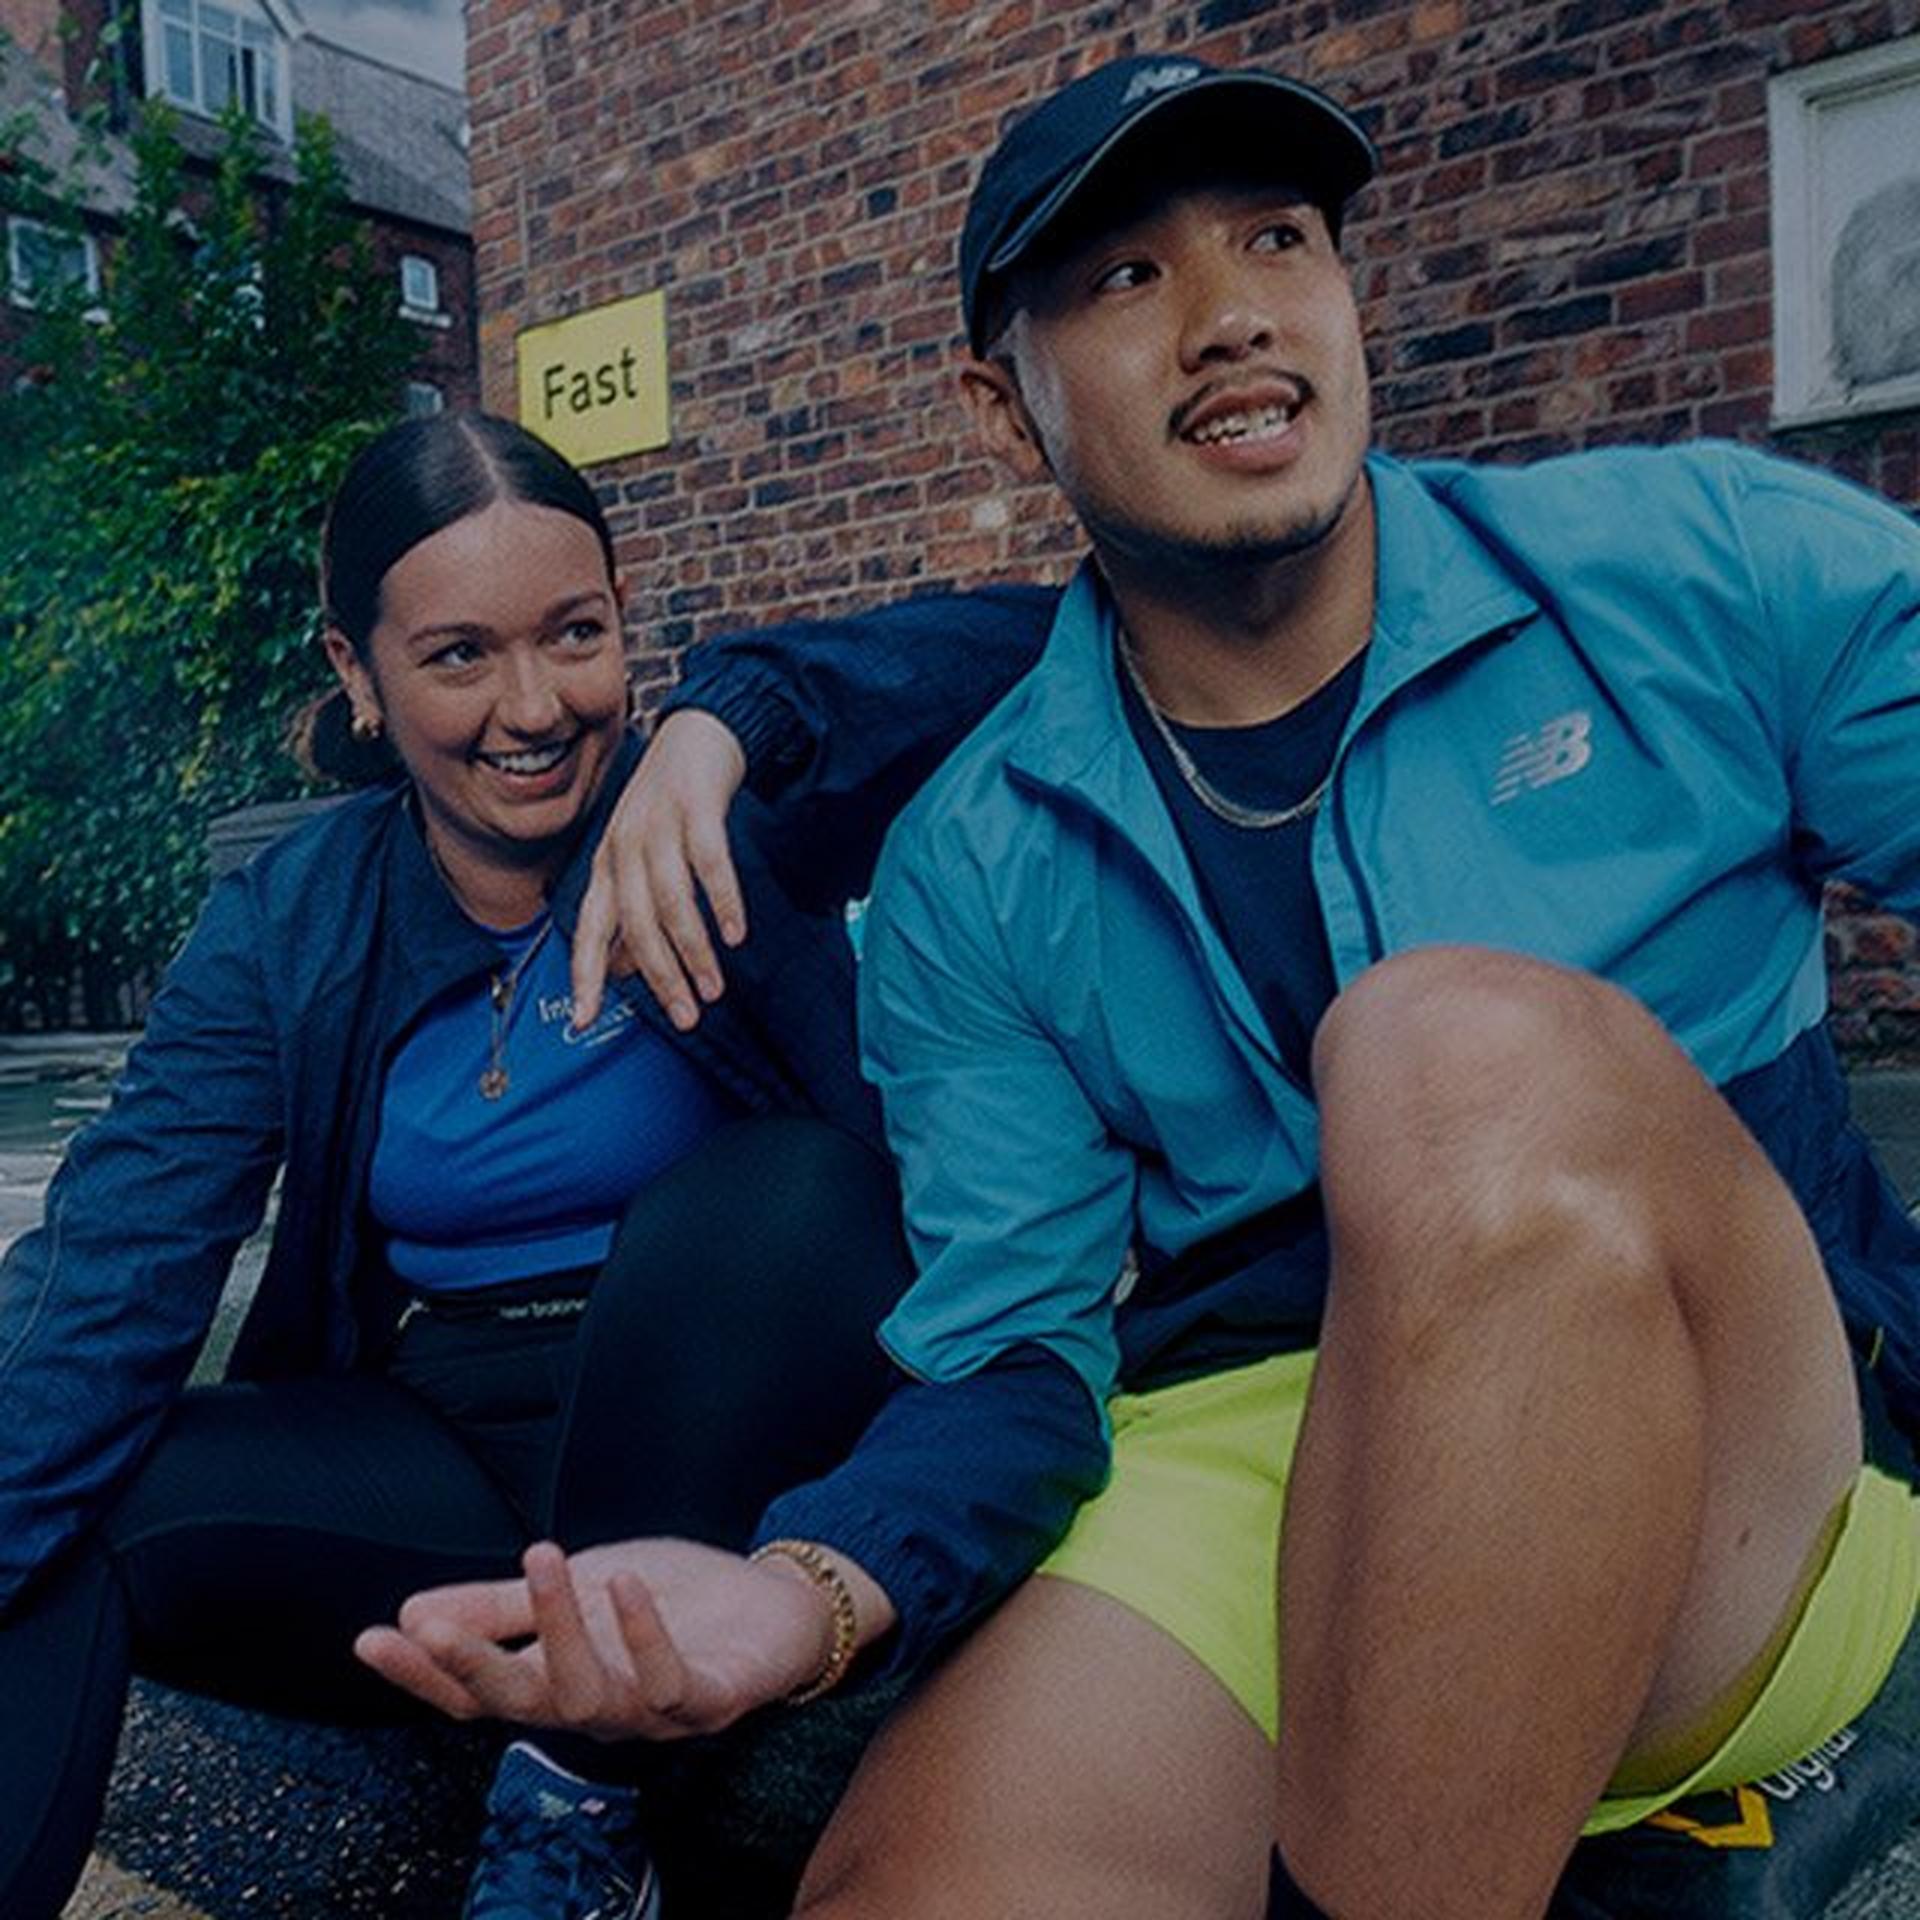 Couple sitting on the side of the road in New Balance running gear